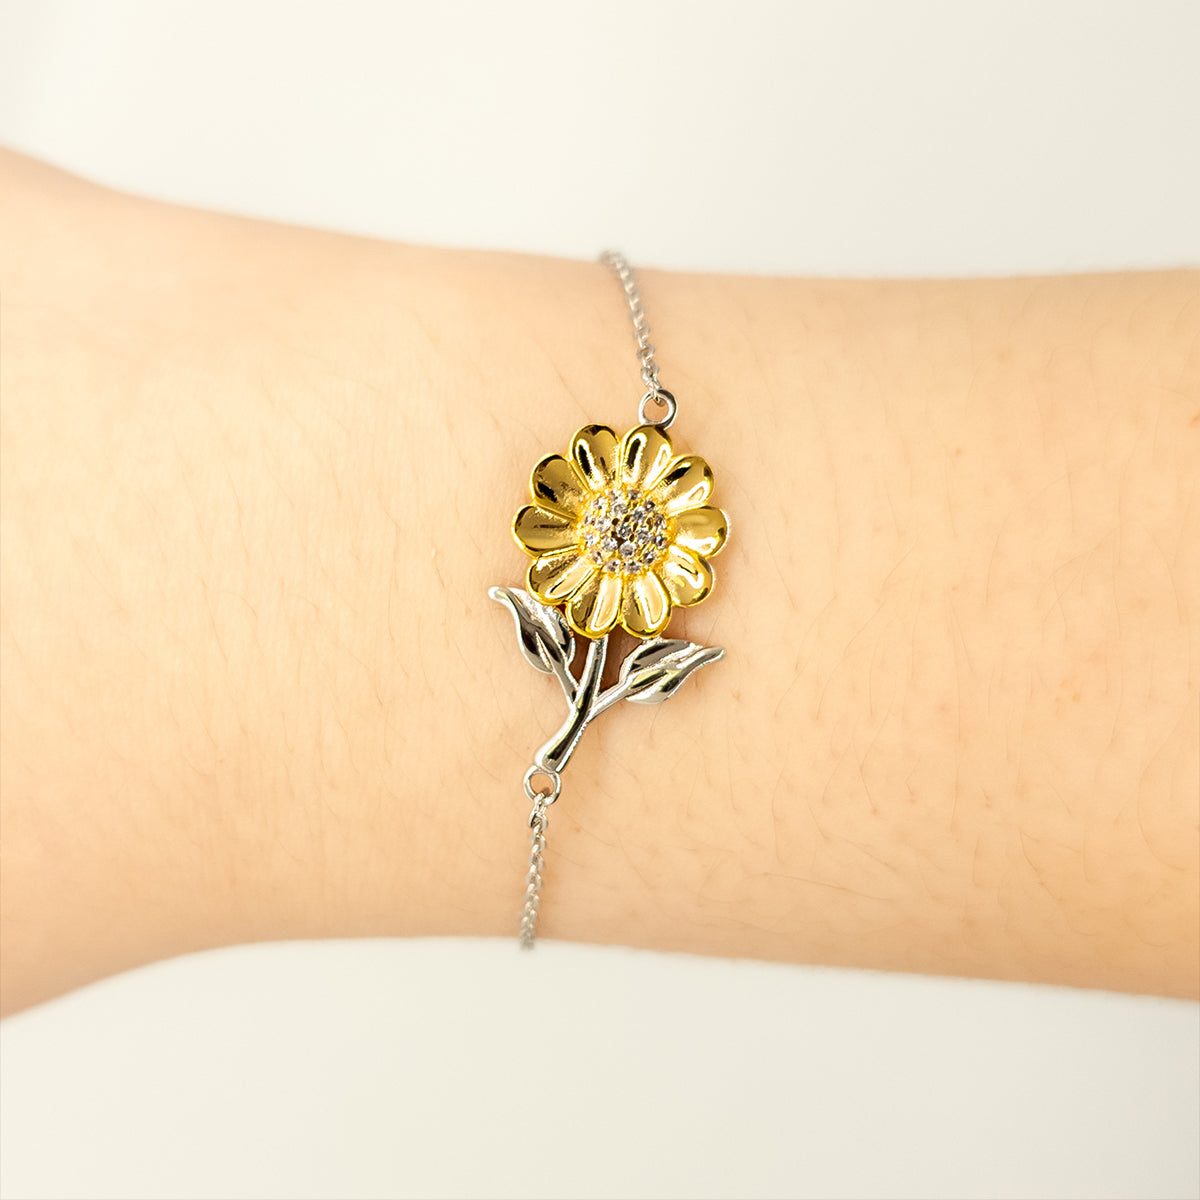 Special Place in My Heart Sunflower Bracelet for Brother-In-Law, Unique Engraved Gift for Christmas, Birthday, and Graduation